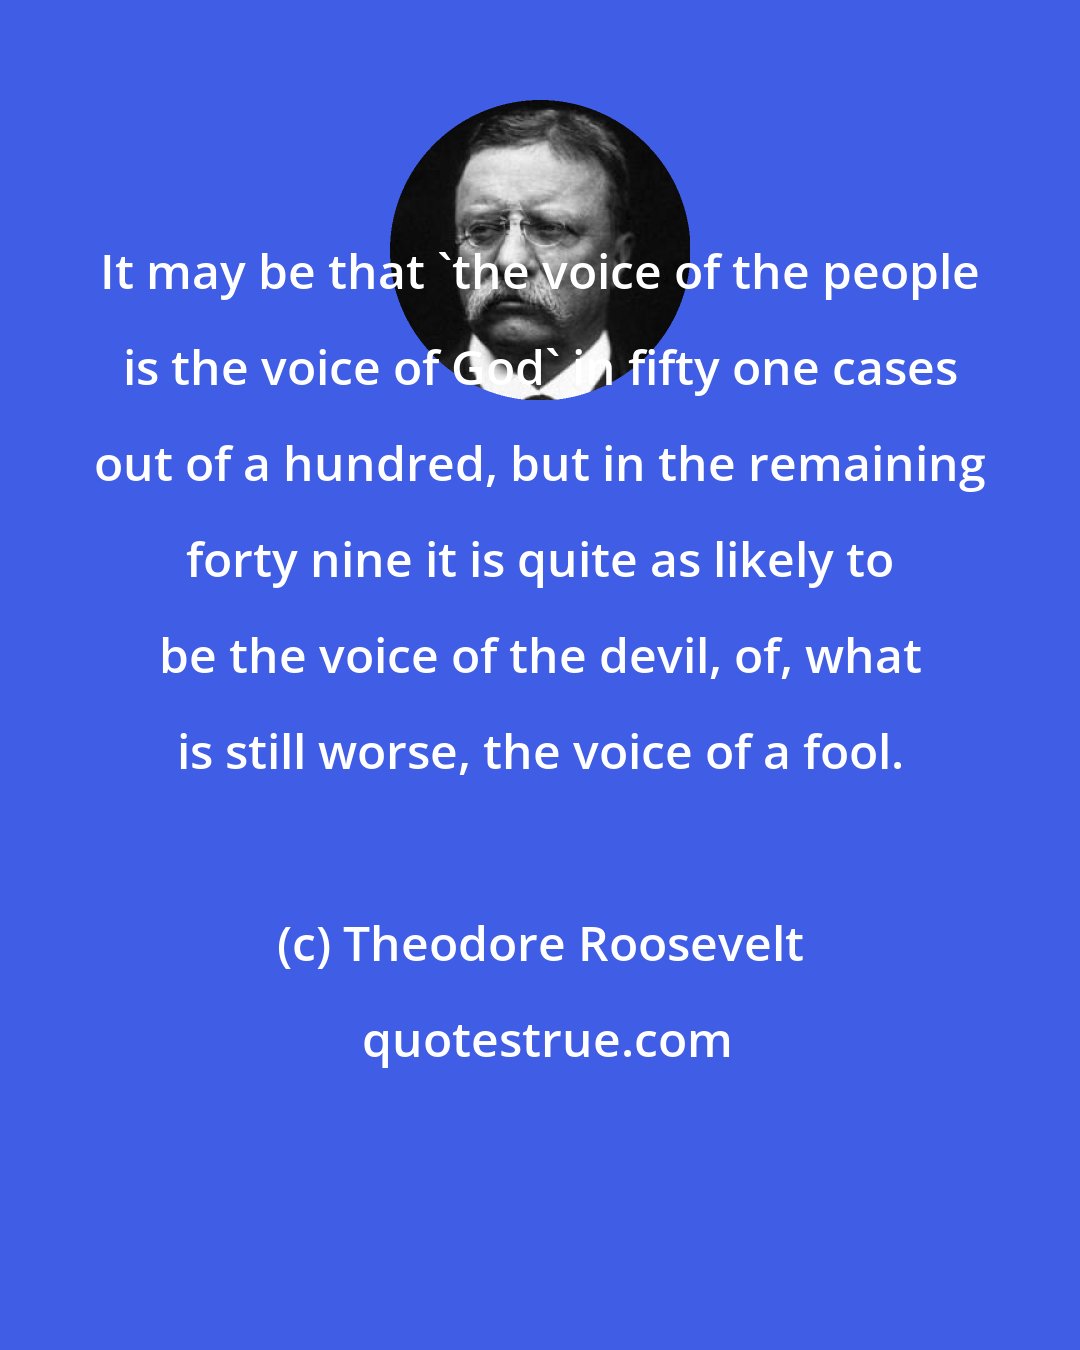 Theodore Roosevelt: It may be that 'the voice of the people is the voice of God' in fifty one cases out of a hundred, but in the remaining forty nine it is quite as likely to be the voice of the devil, of, what is still worse, the voice of a fool.